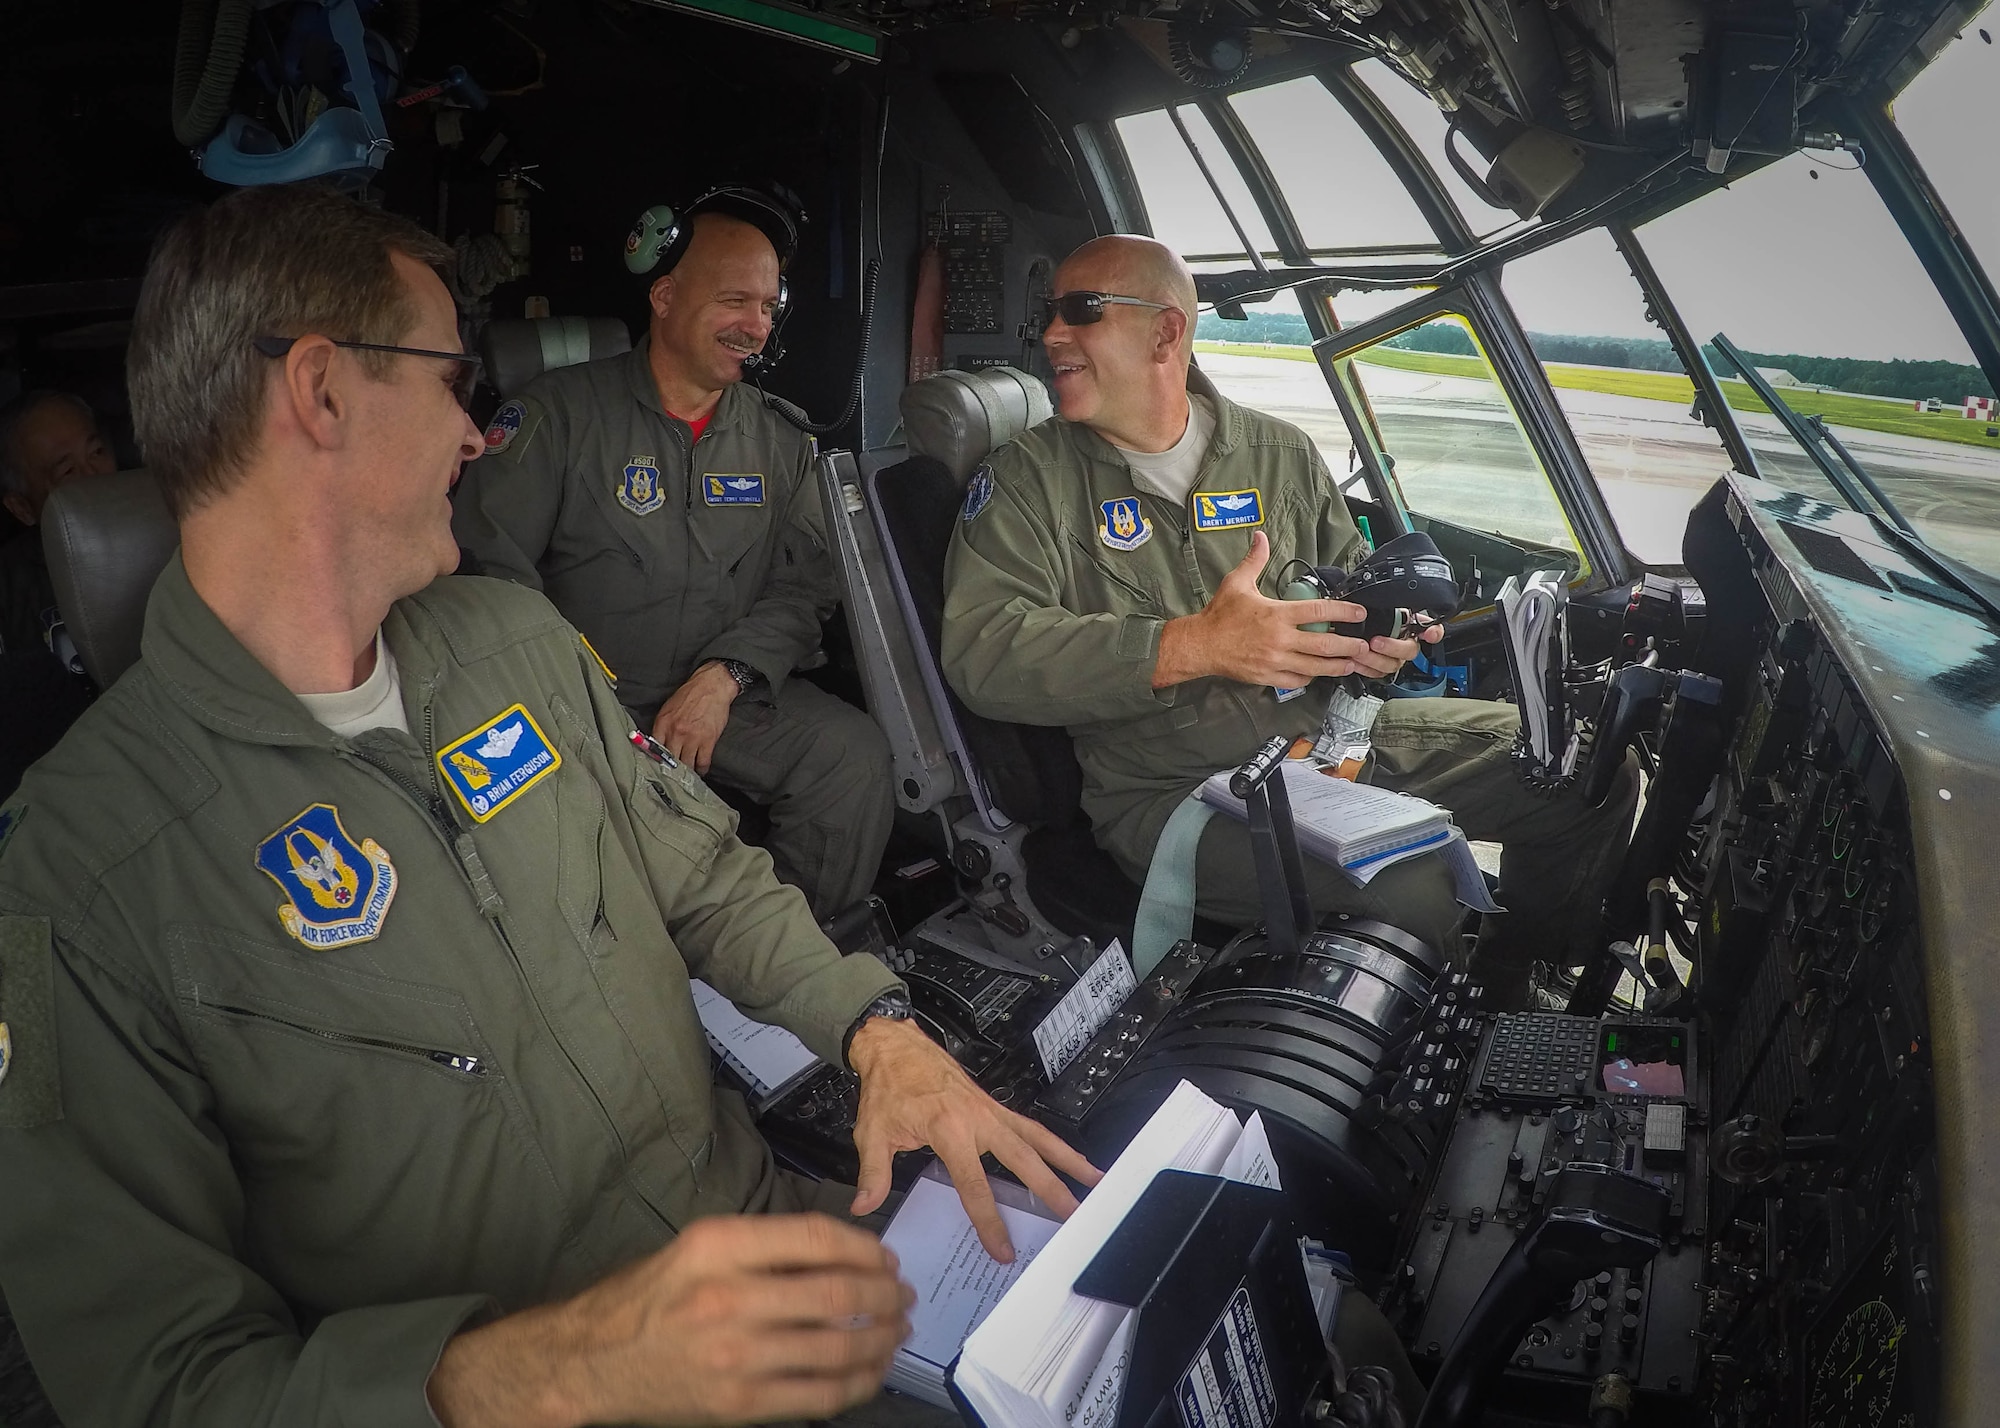 Col. Brent Merritt, 94th Airlift Wing vice commander; Chief Master Sgt. Terry Studstill, 700th Airlift Squadron Flight Engineer superintendent; and Lt. Col. Brian Ferguson, 94th Operations Support Squadron commander, prepare for flight at Dobbins Air Reserve Base, Ga., on June 4, 2016. This was Merritt's last flight as an Air Force Reservist before he retired. (US Air Force Photo by Senior Airman Miles Wilson) 